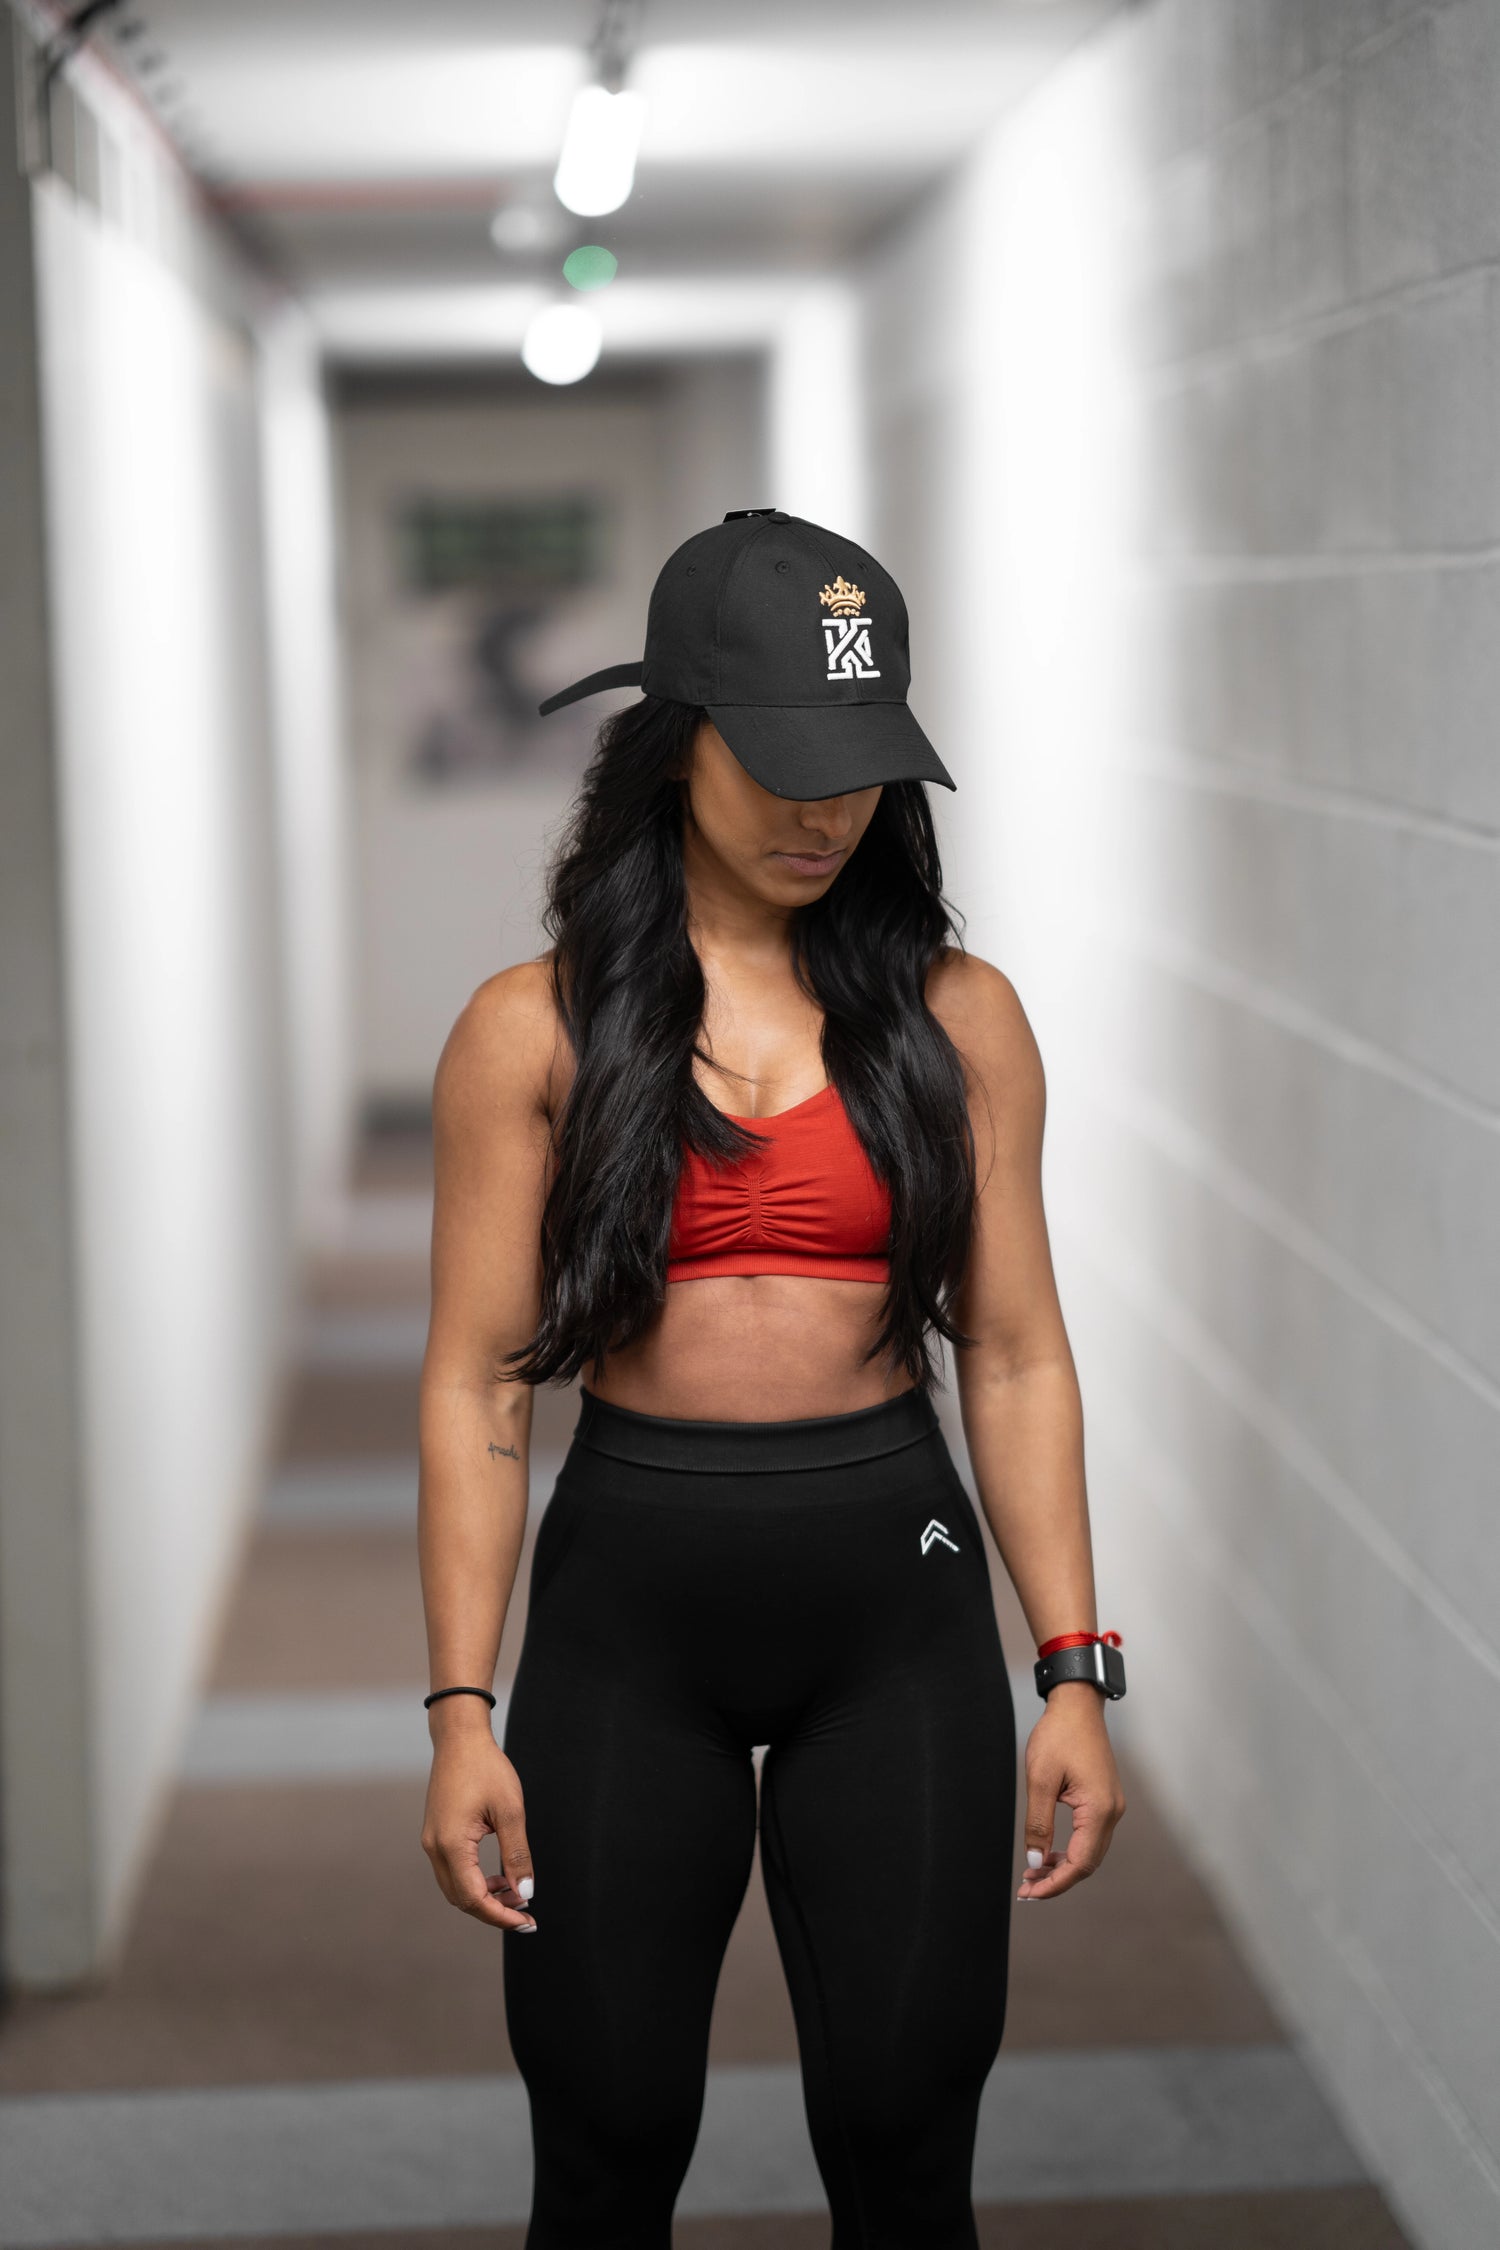 KingsGym Cool Classic Cap On Lady